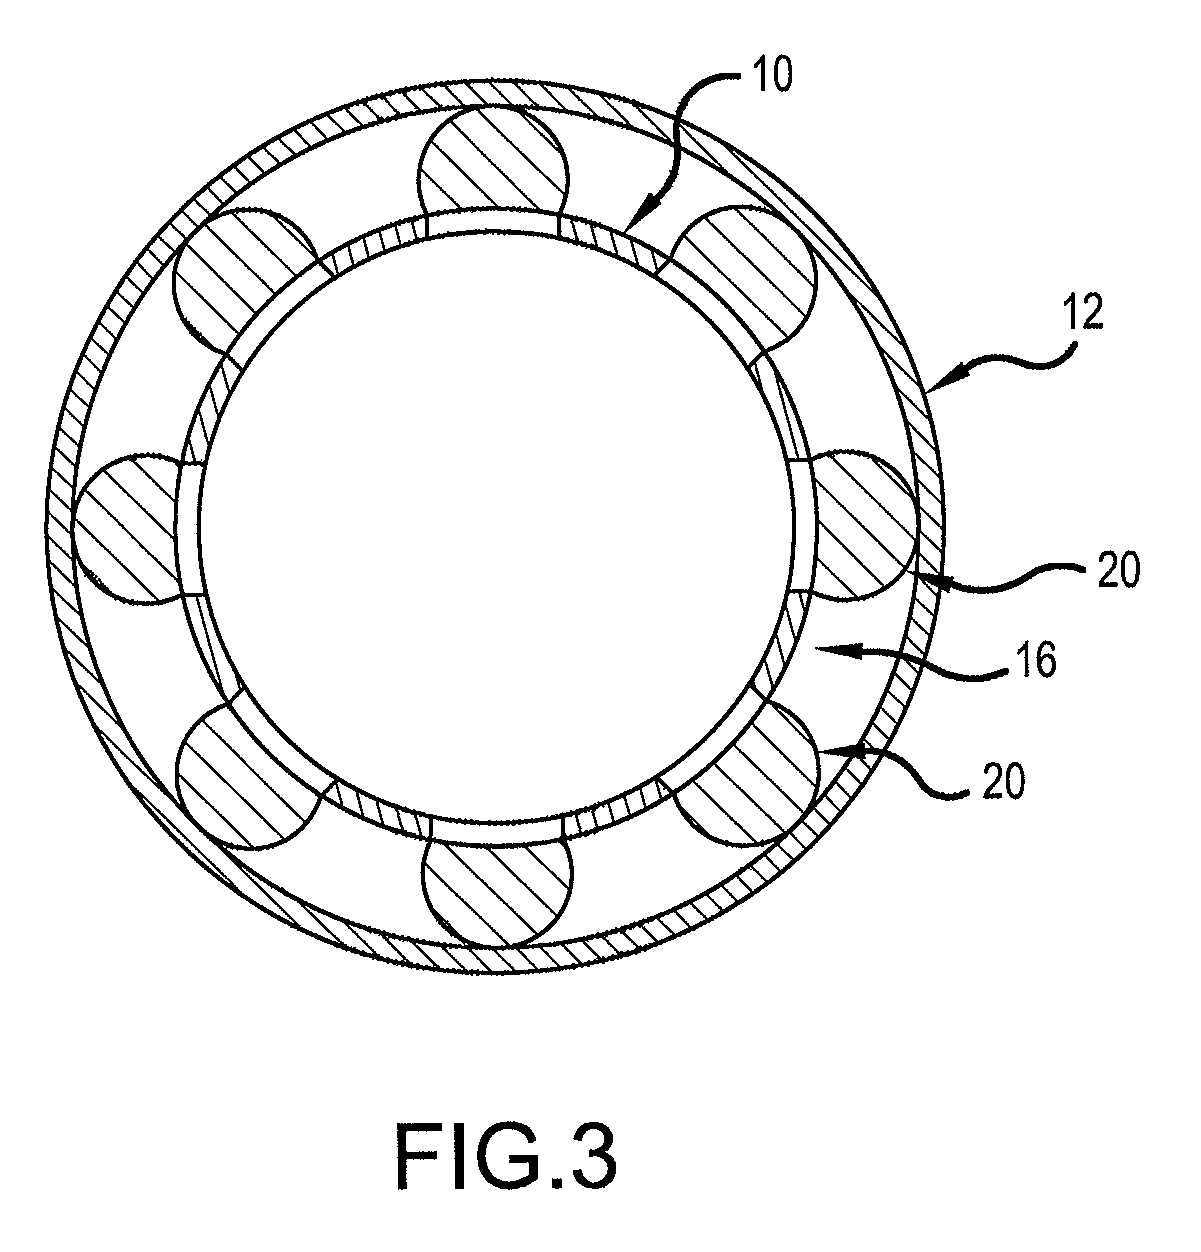 Method of centralising tubing in a wellbore